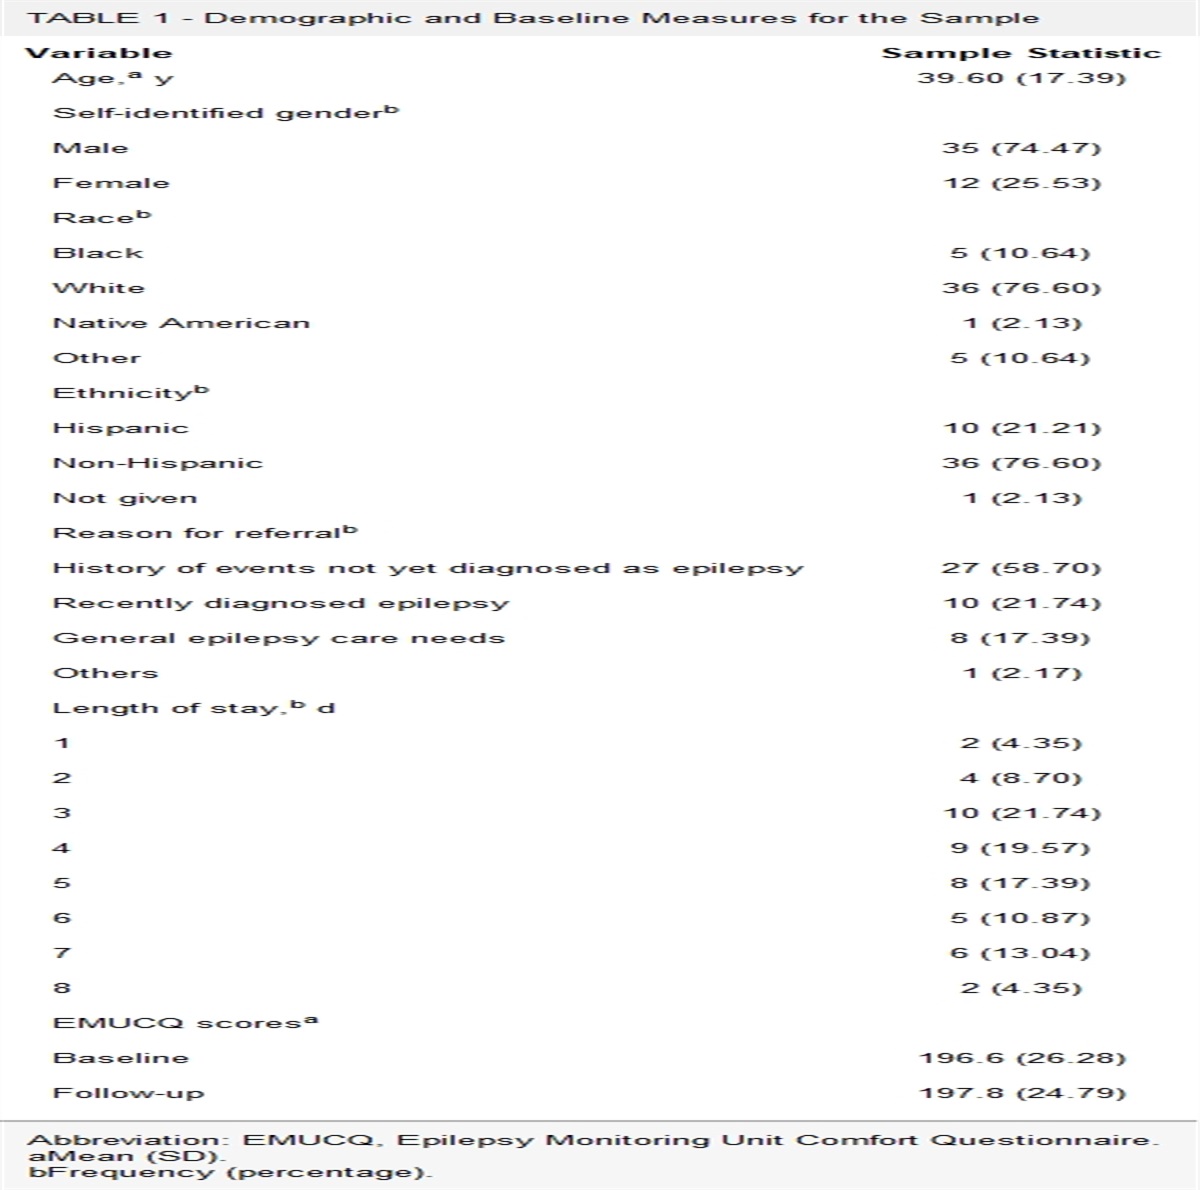 Length of Stay Does Not Predict Change in Epilepsy Monitoring Unit Comfort Questionnaire Scores